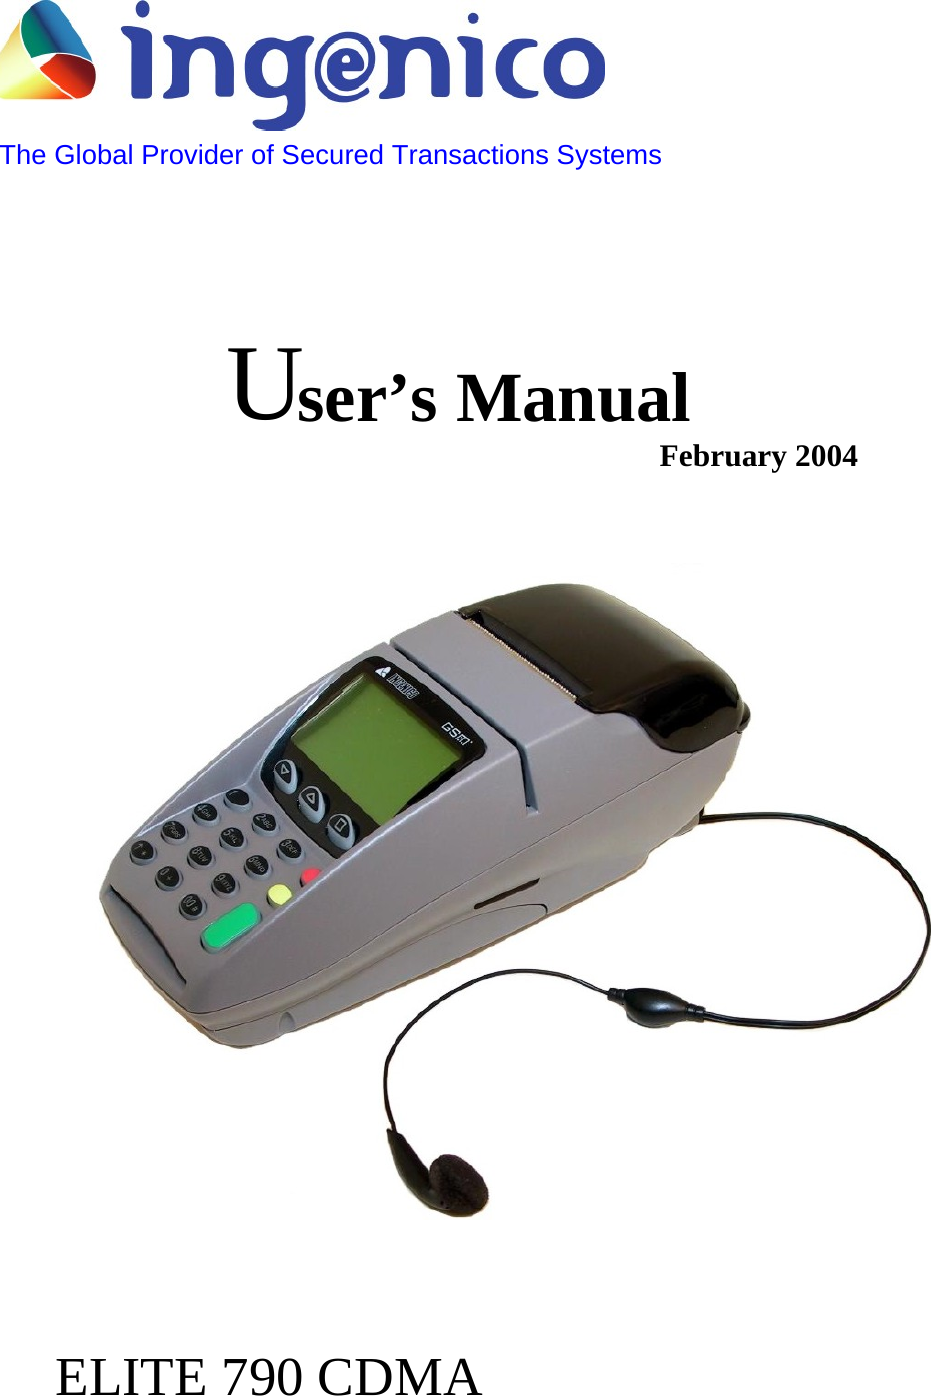   The Global Provider of Secured Transactions Systems        ELITE 790 CDMAUser’s Manual  February 2004